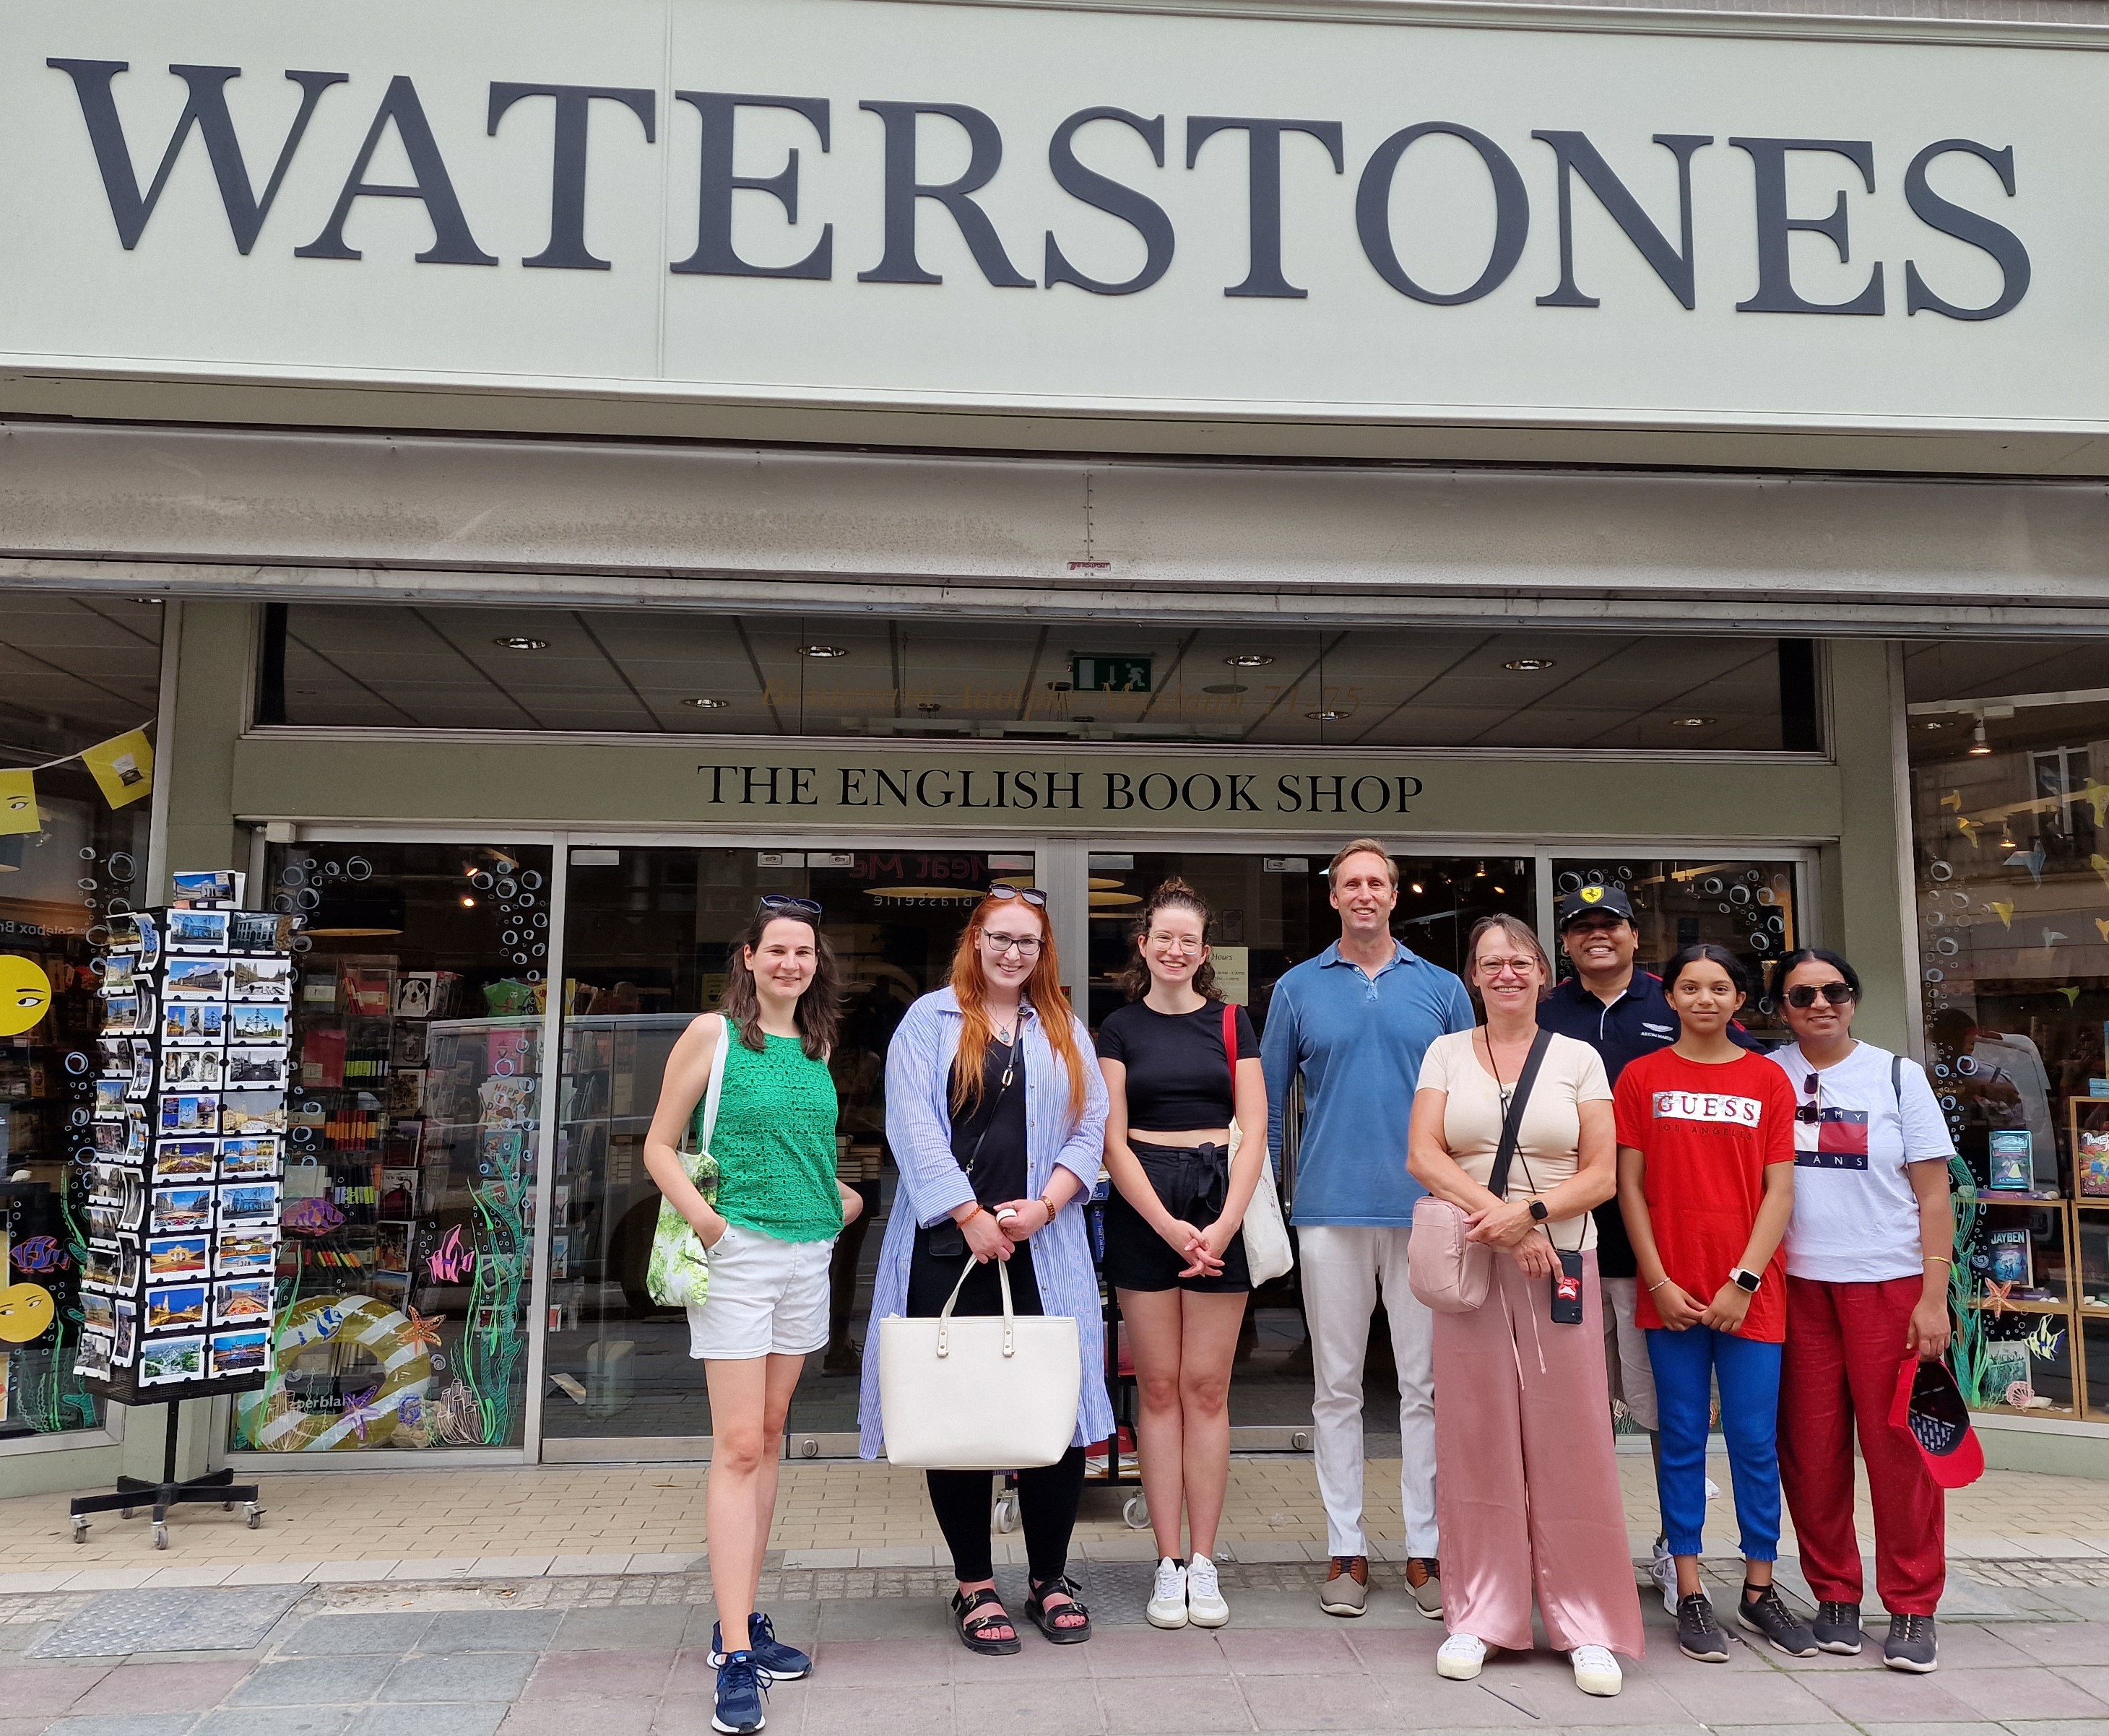 City walk co-organised with Waterstones bookstore